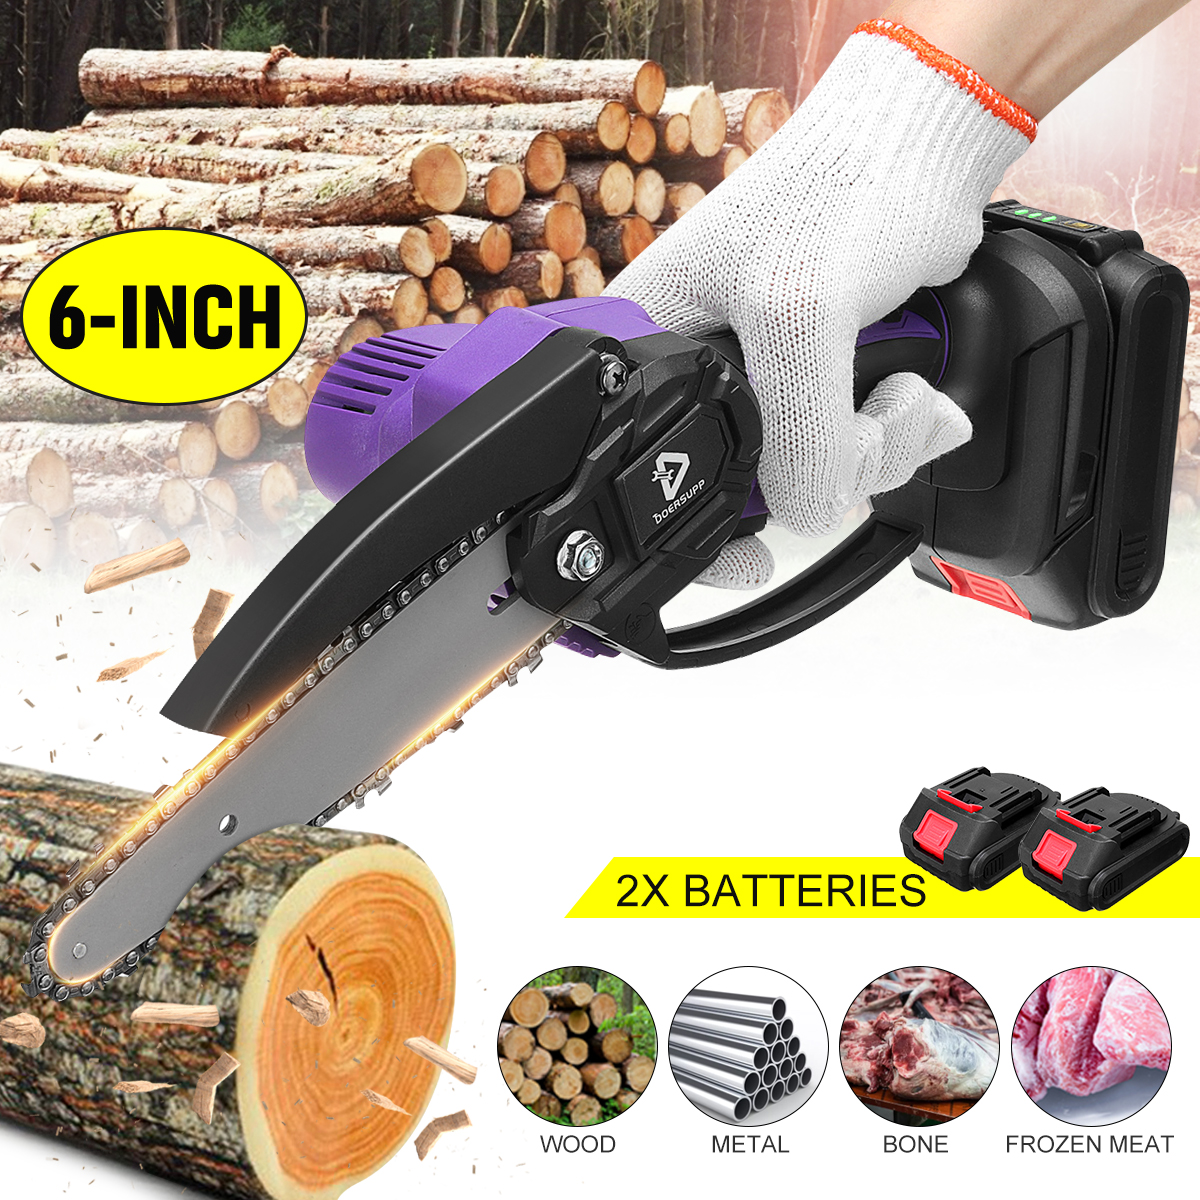 Doersupp-6-Inch-Mini-Electric-Chain-Saw-W-None12pcs-Battery-Woodworking-Pruning-Chainsaw-Tool-Wood-C-1879318-2